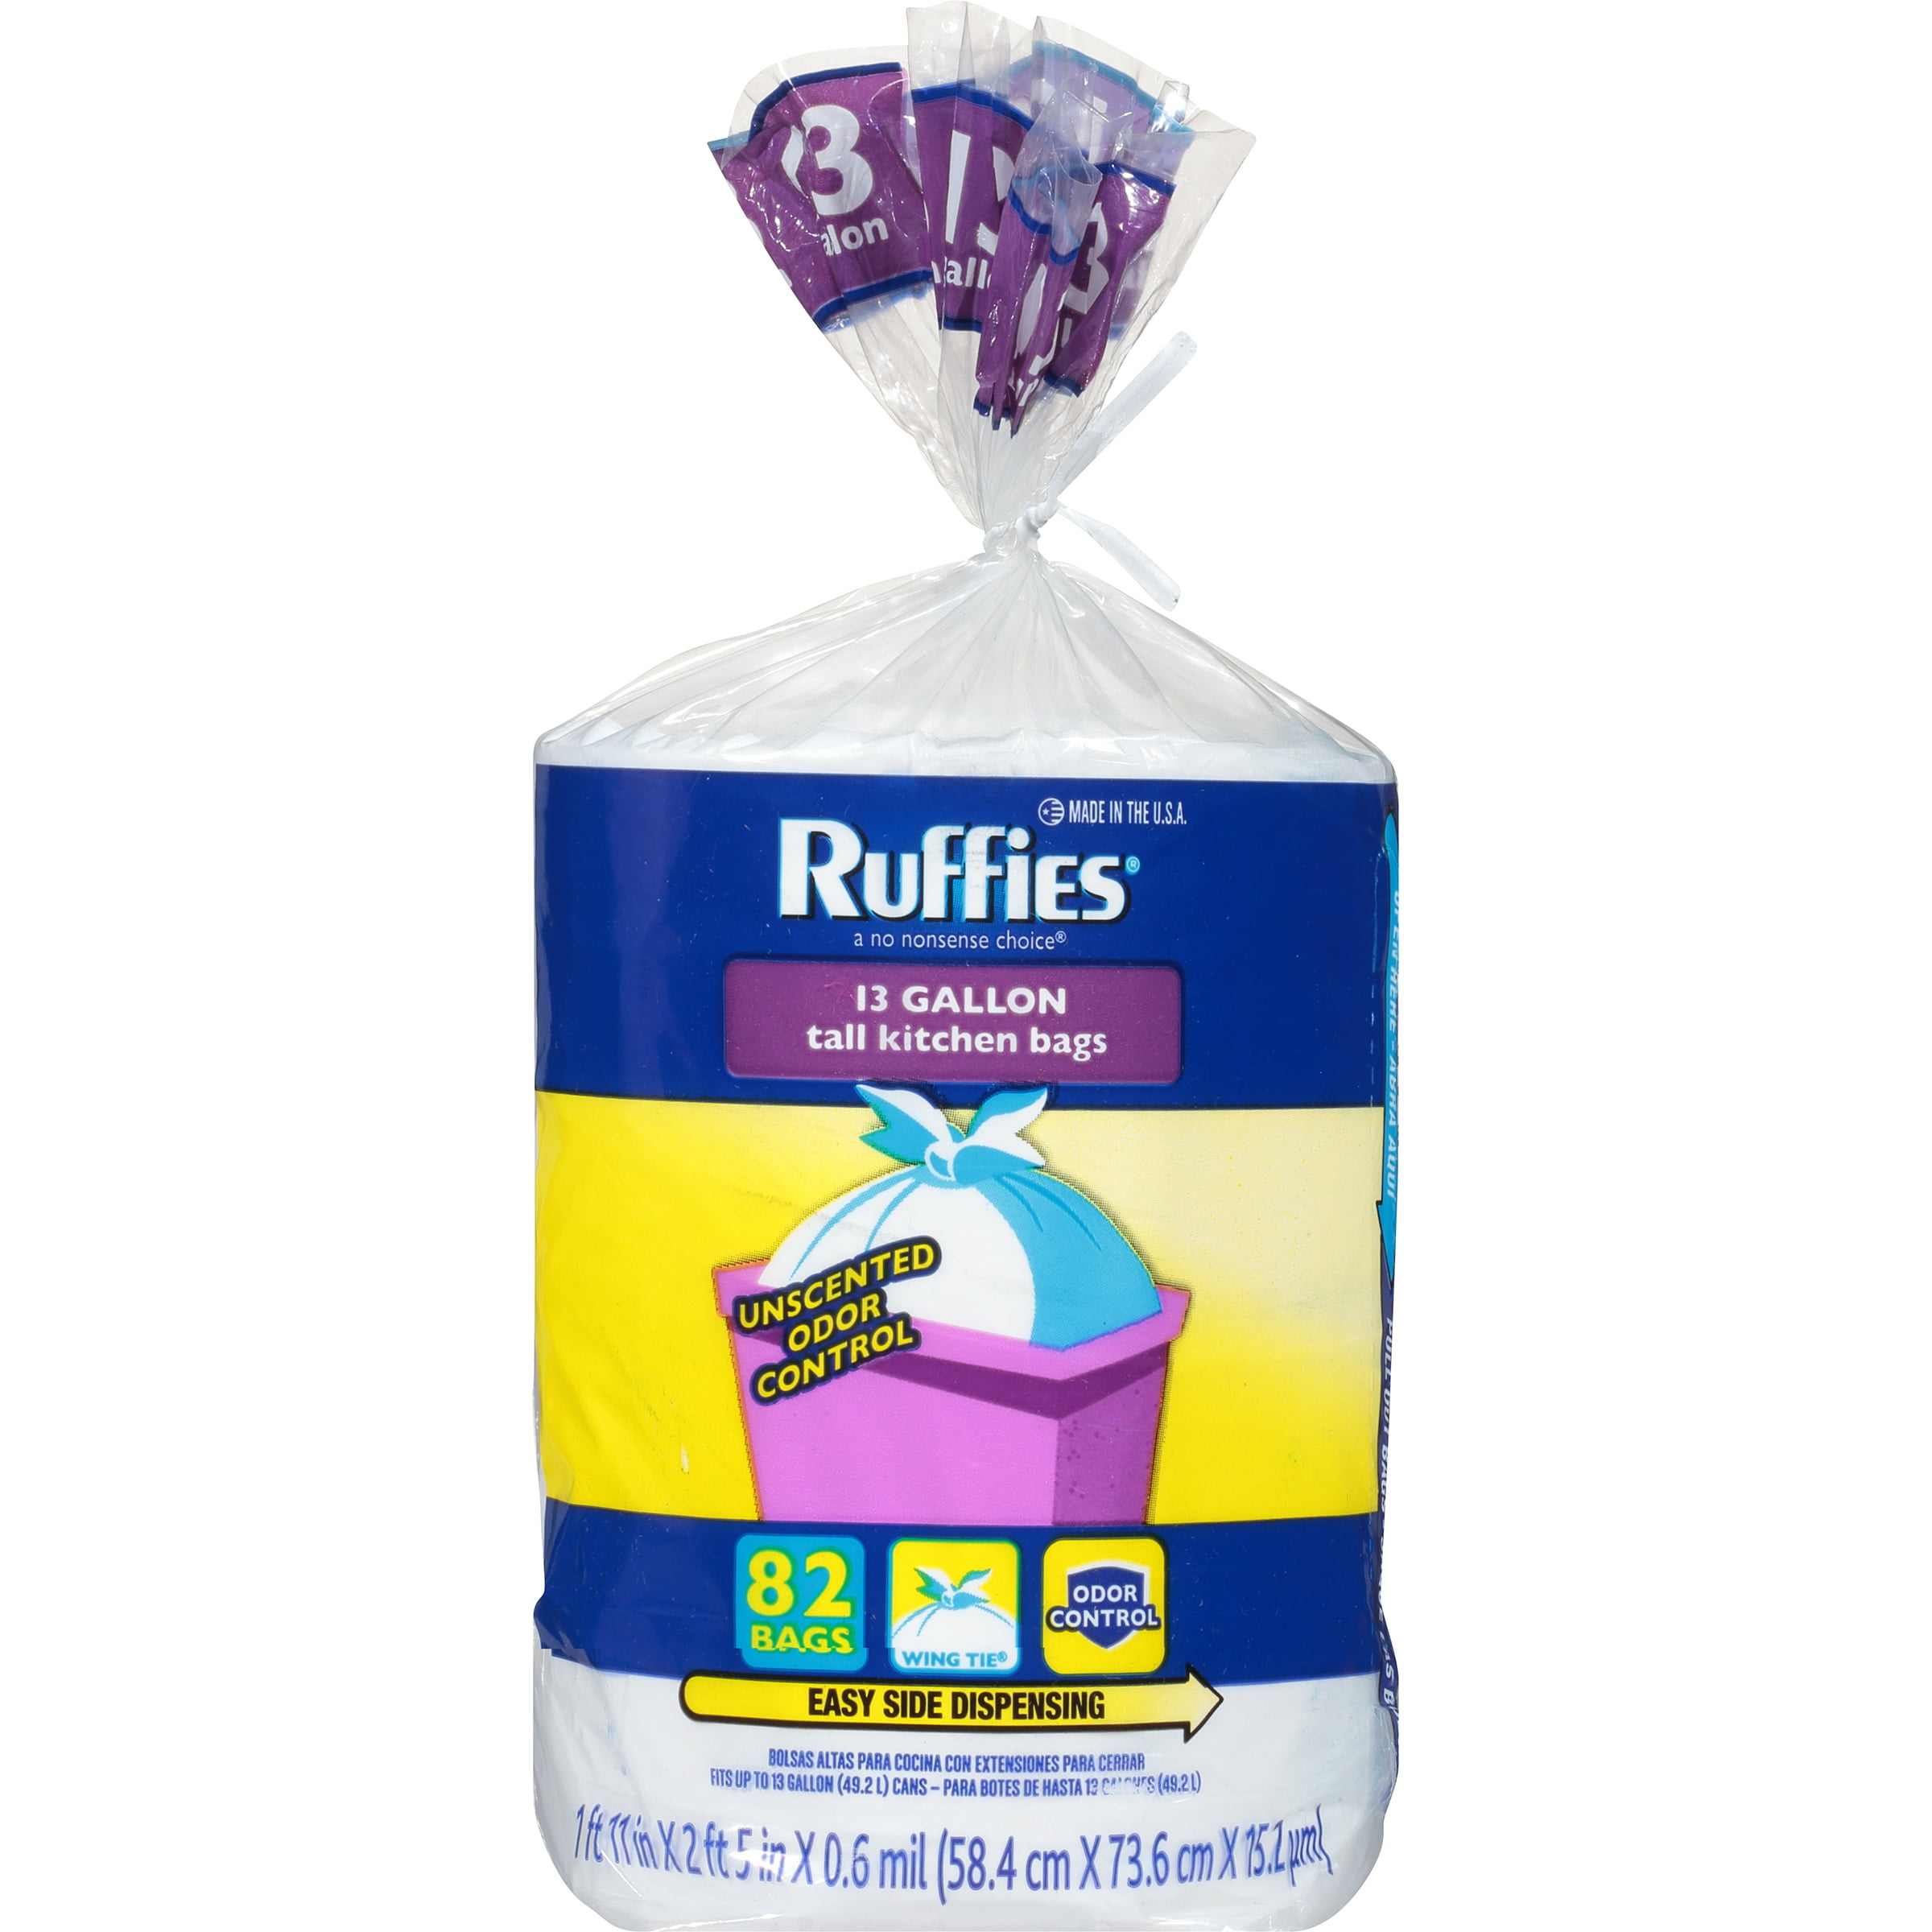 Ruffies Tall Kitchen Wing Tie Trash Bags, 13 Gallon, 82 Count